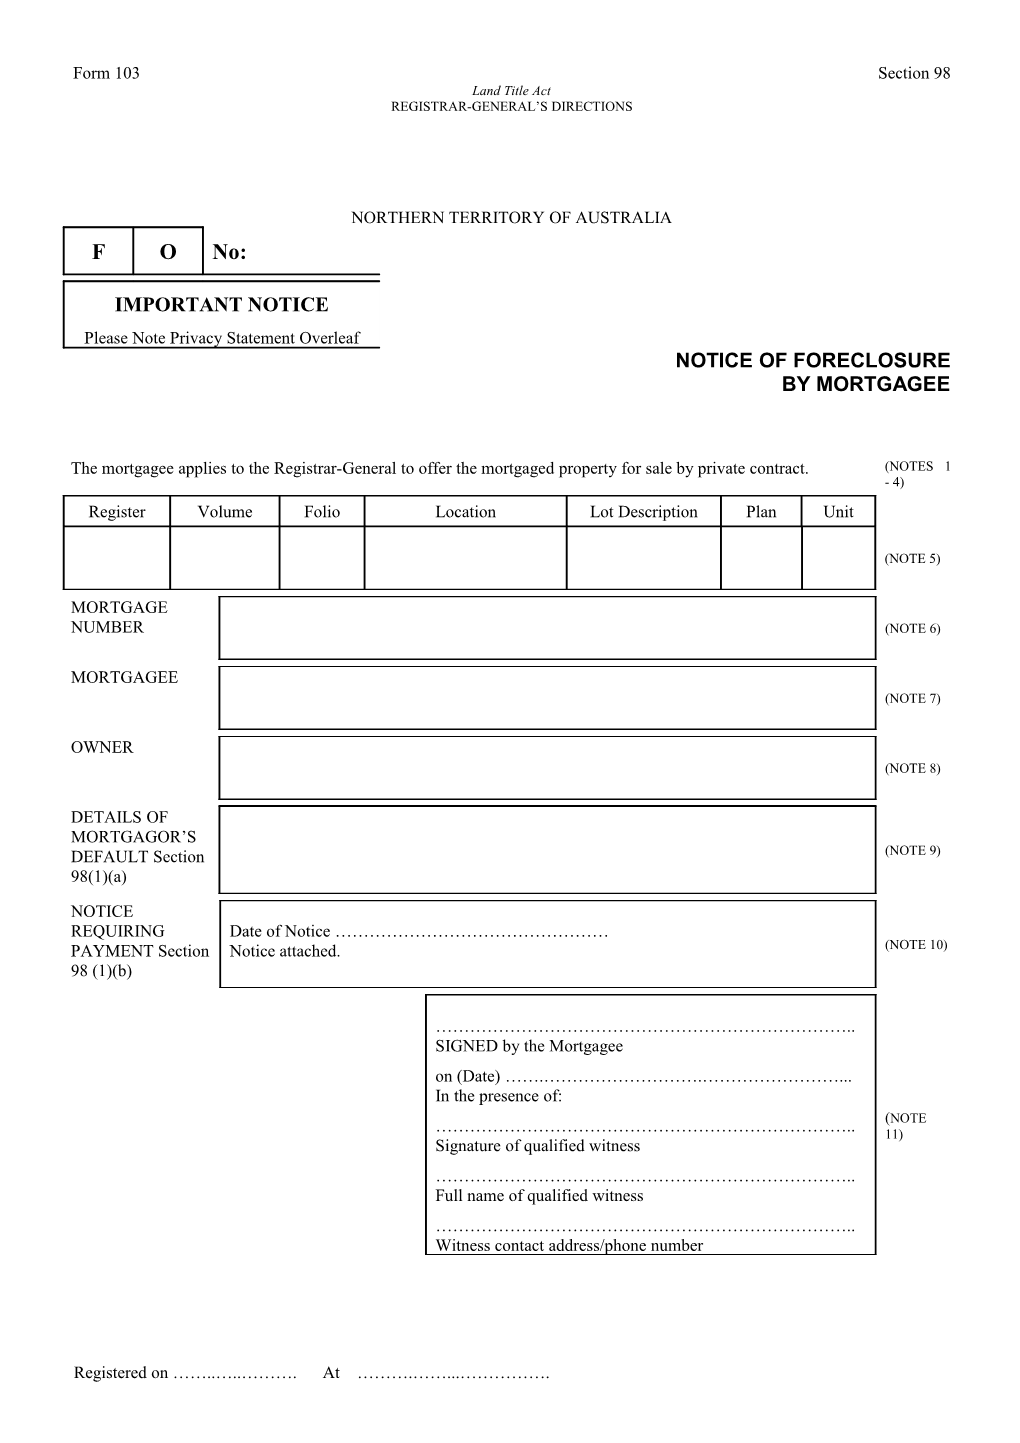 Form No. 103 - Notice of Foreclosure by Mortgagee